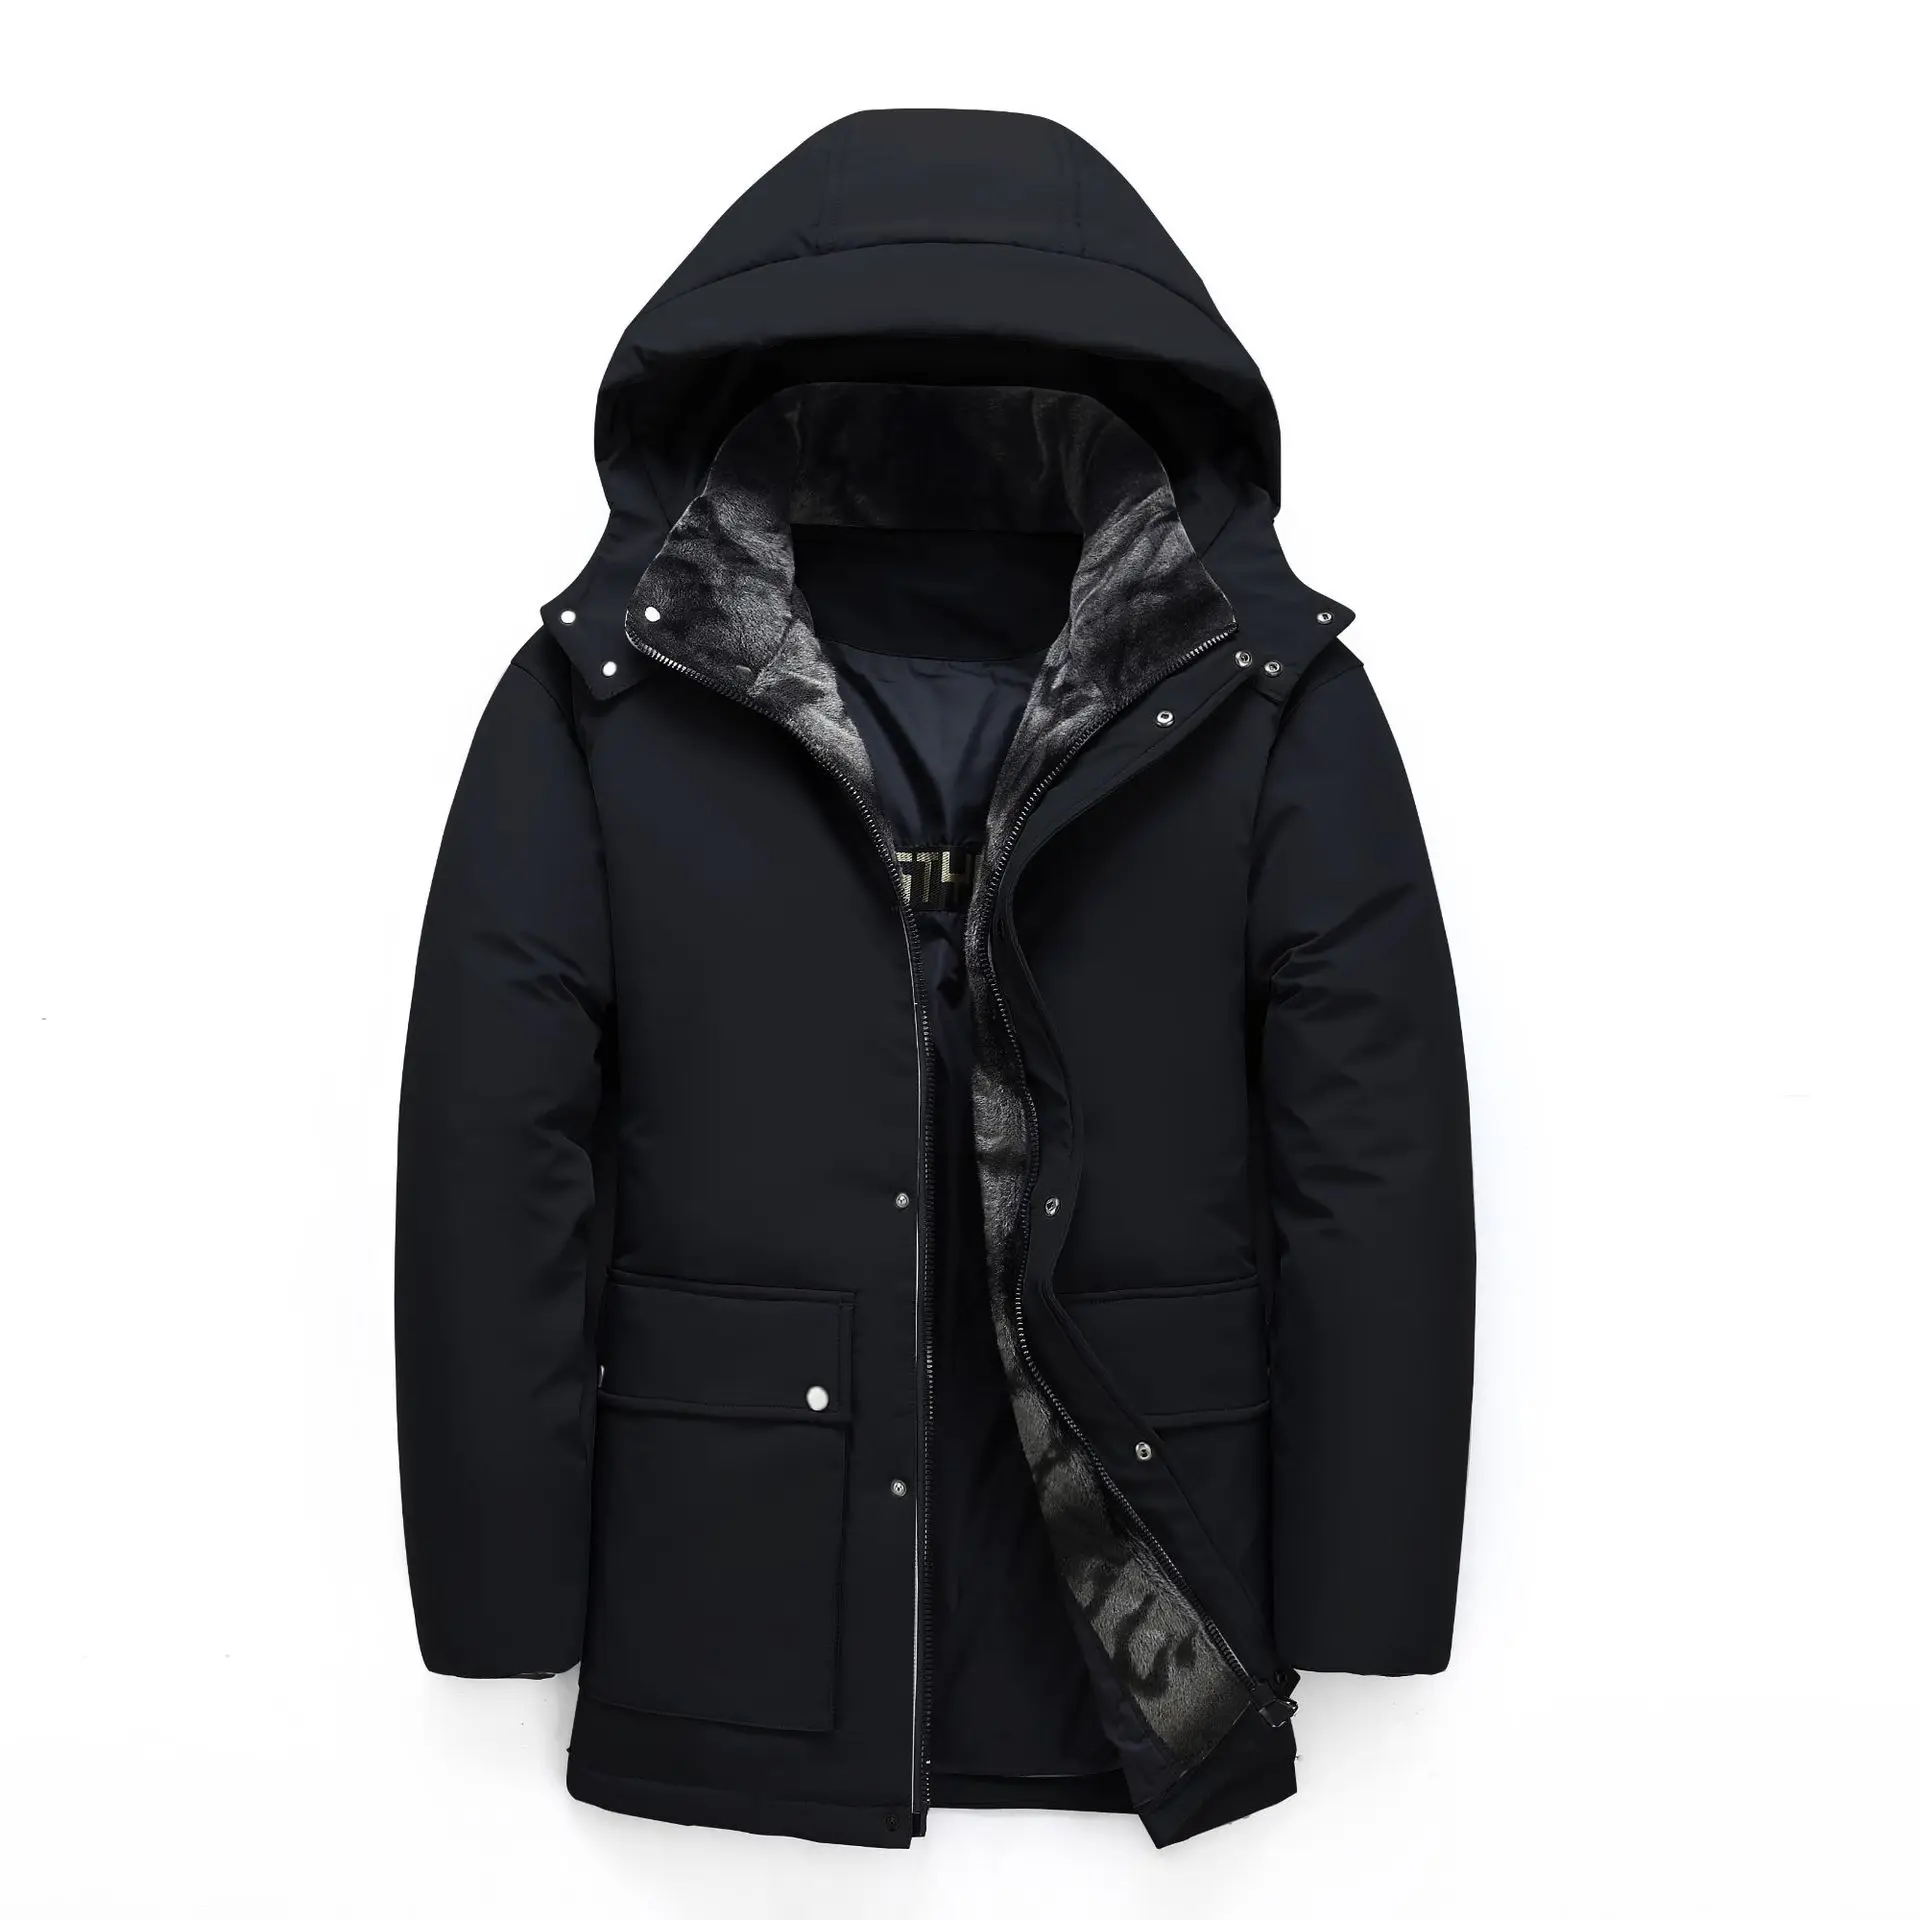 Man Winter Fashion Casual Hooded Thickening Warm  White Duck Down Jacket Upscale Boutique Hooded Down Coat enlarge